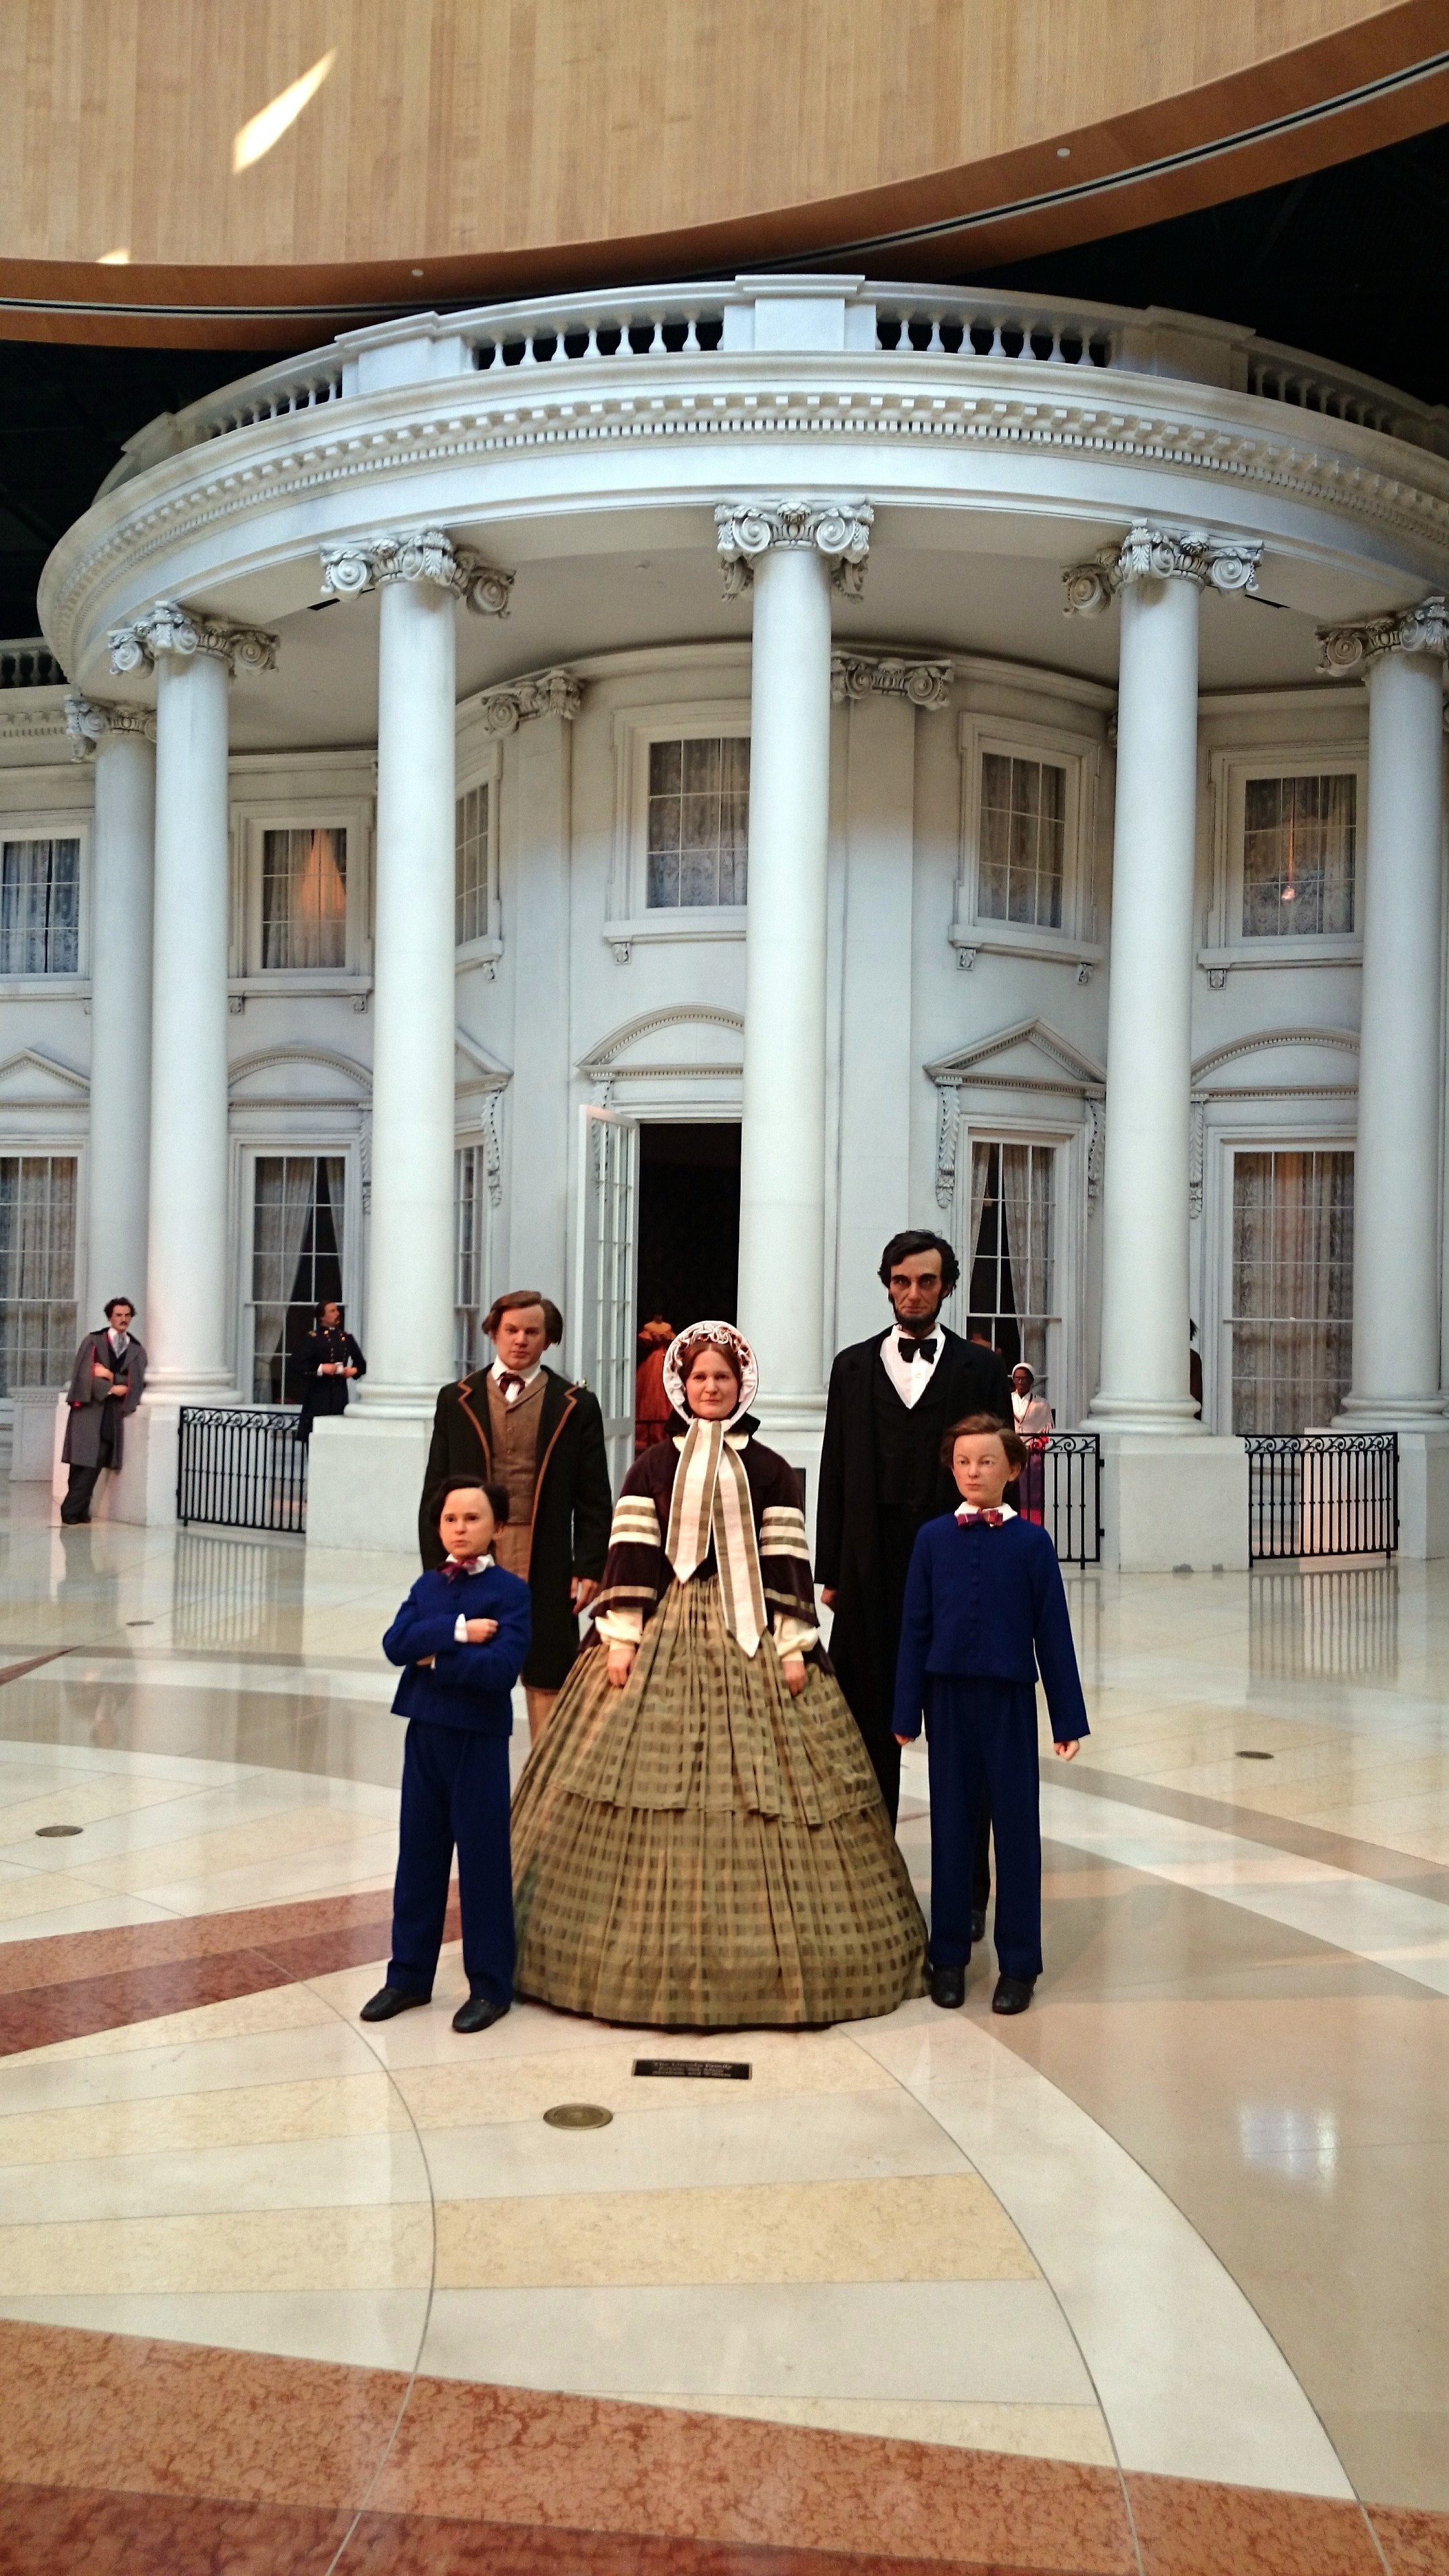 Abraham Lincoln Presidential, Museum Springfield Illinois, Lincoln Presidential library, Presidential library museum, 2160x3840 4K Handy